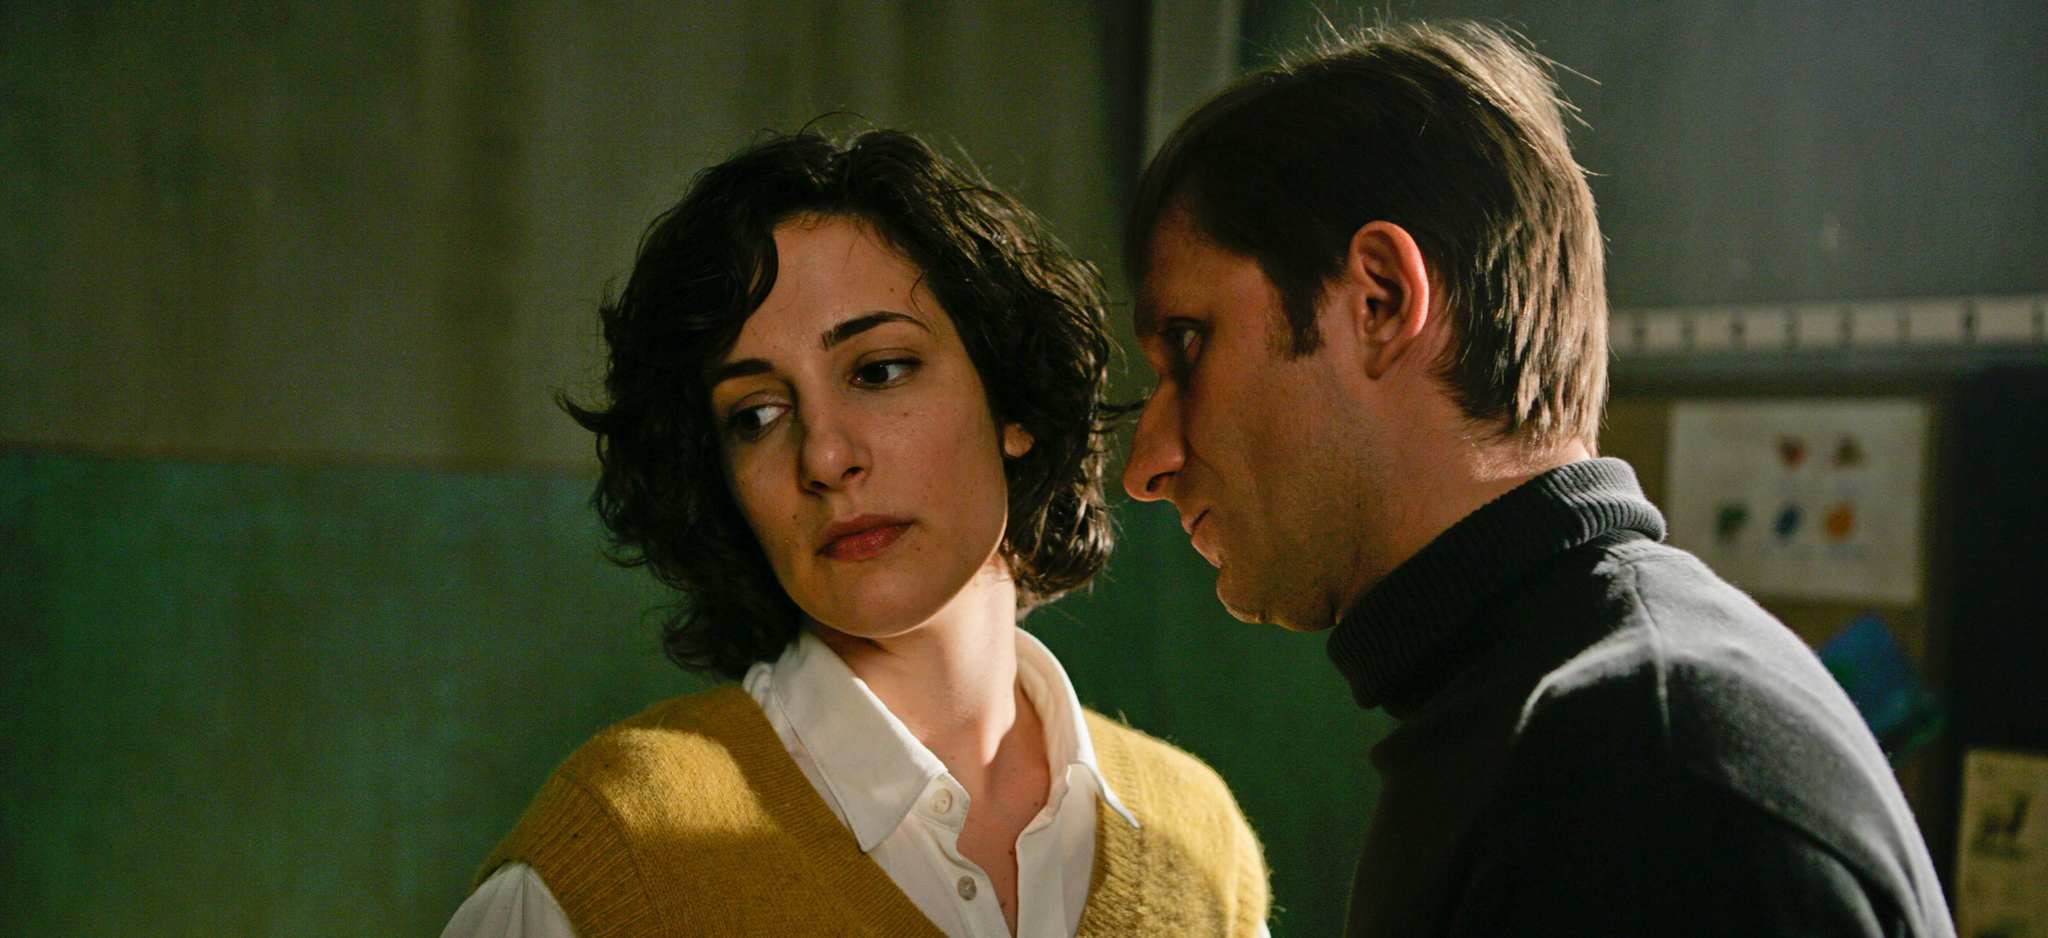 Still of Zana Marjanovic and Goran Kostic in In the Land of Blood and Honey (2011)